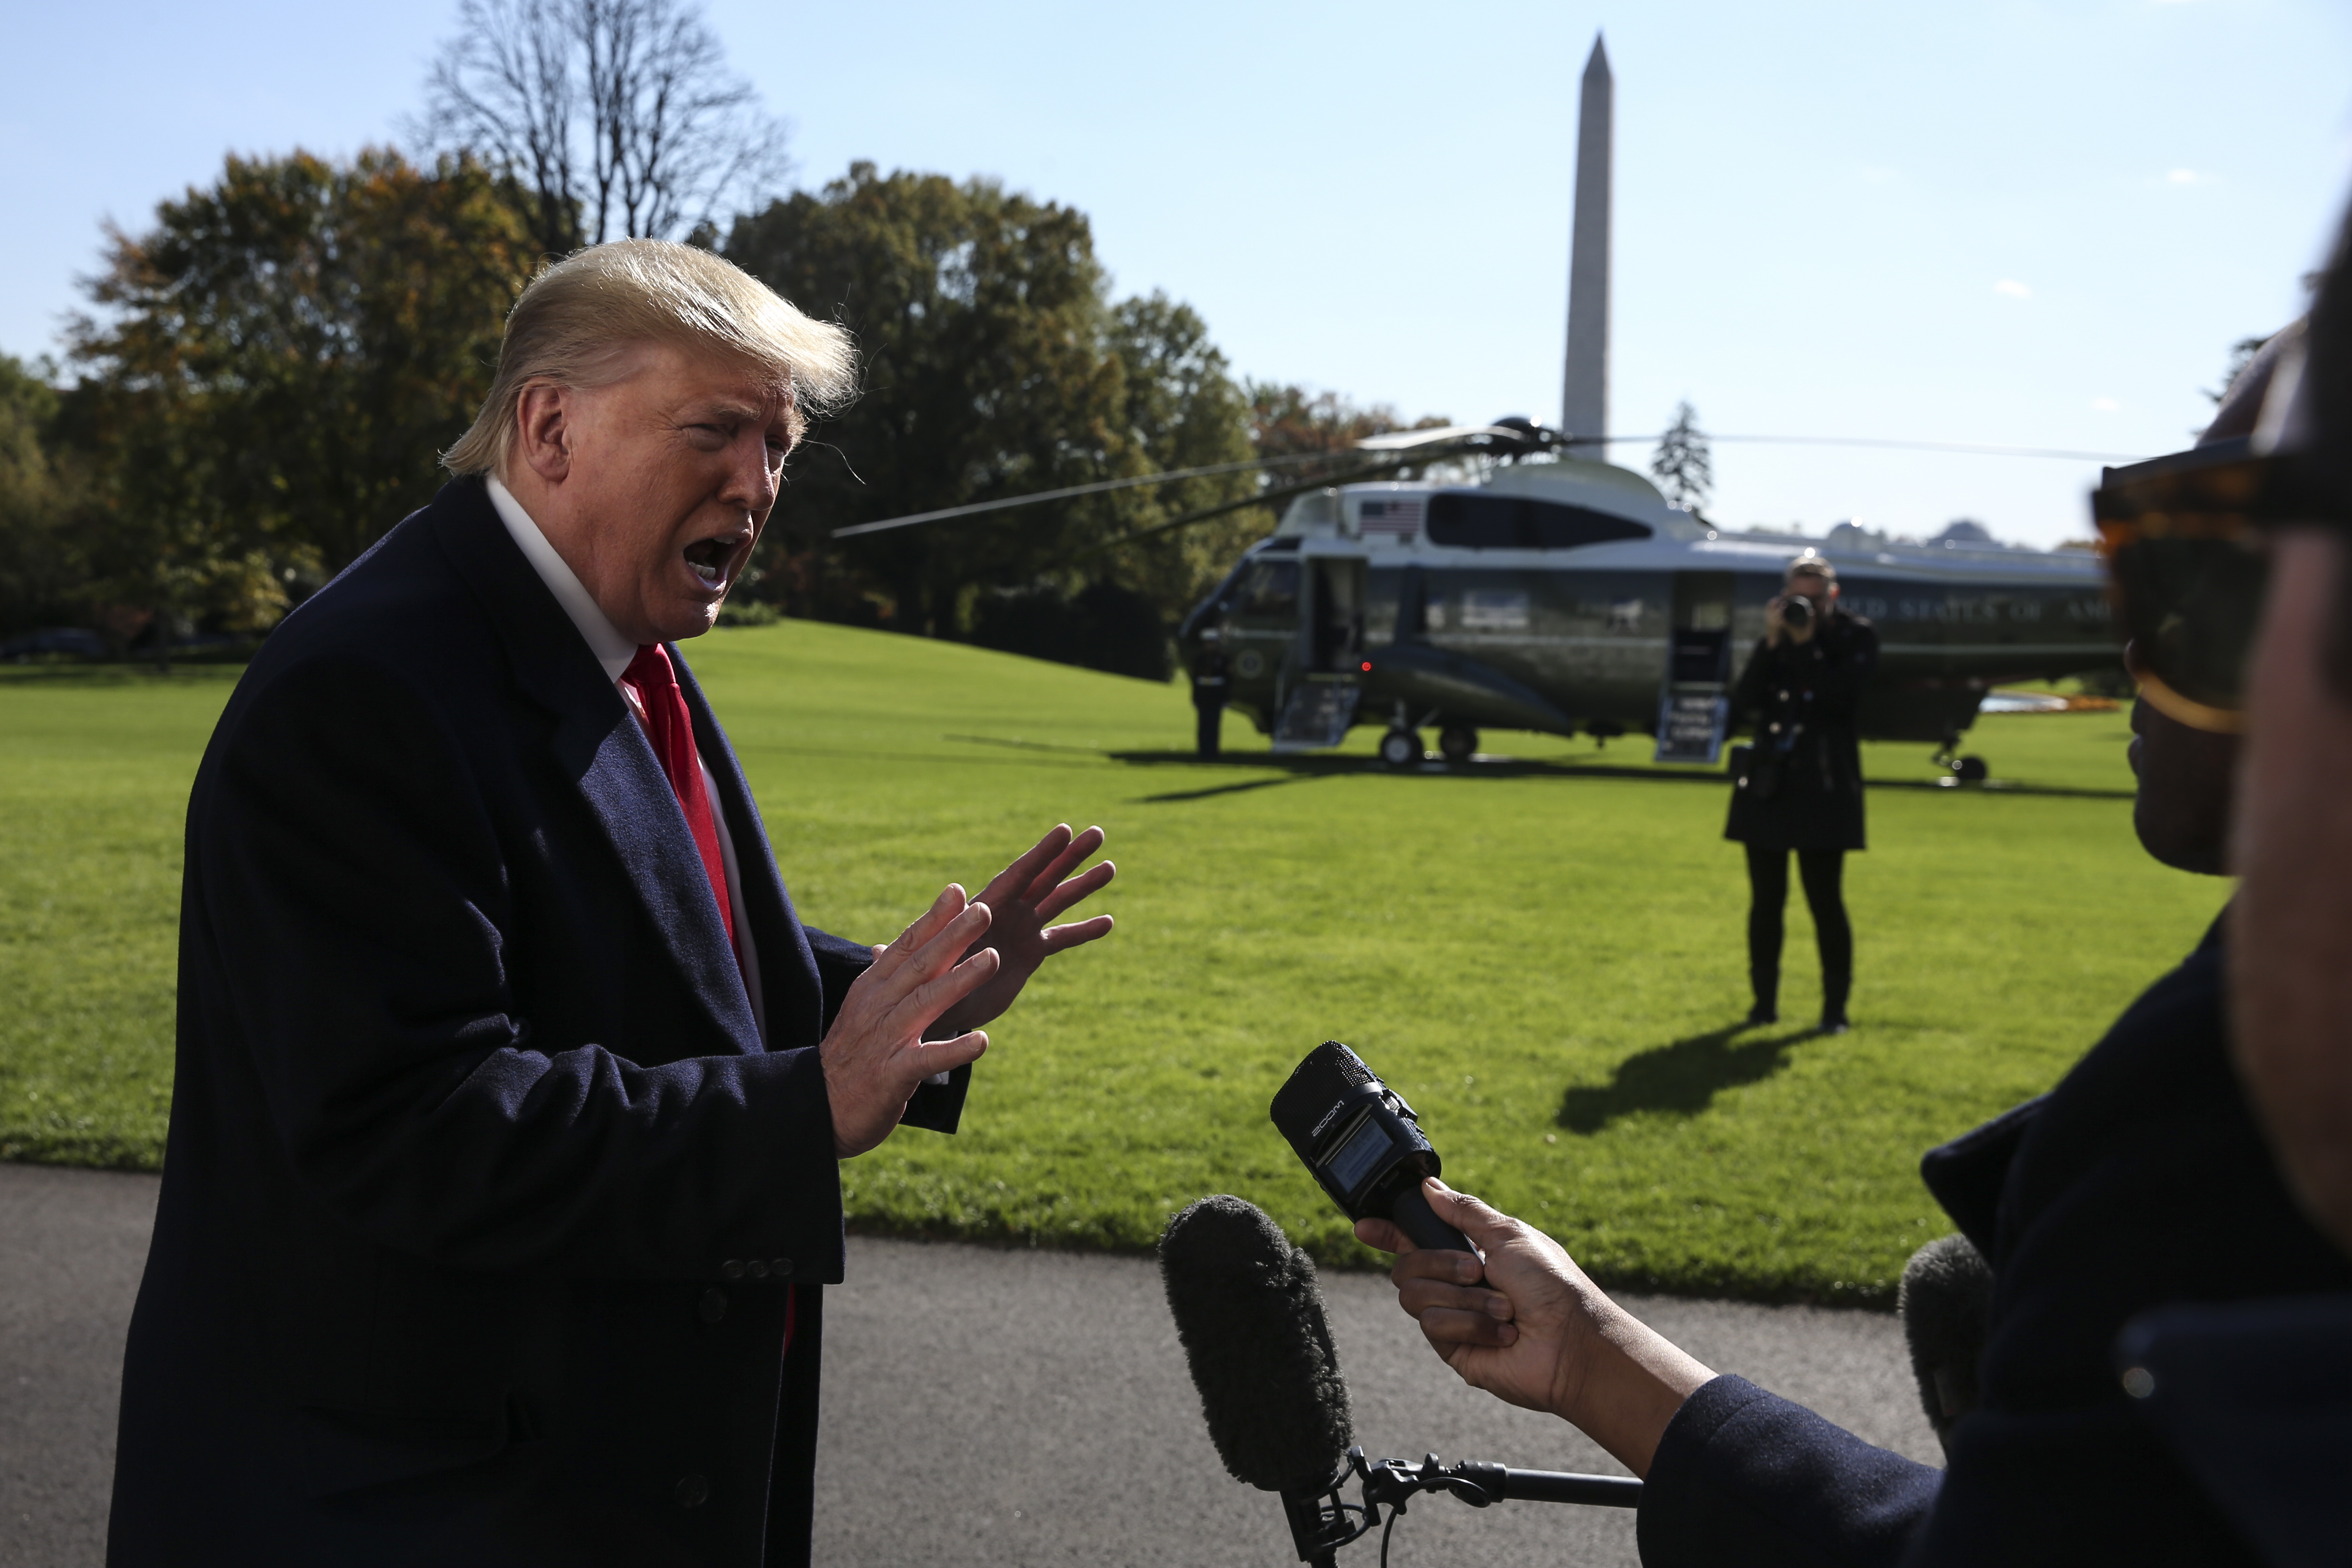 epa07970143 US President Donald J. Trump talks to members of the media on the South Lawn of the White House upon his arrival from a trip to New York, in Washington, DC, USA, 03 Novermber 2019.  EPA/Oliver Contreras / POOL